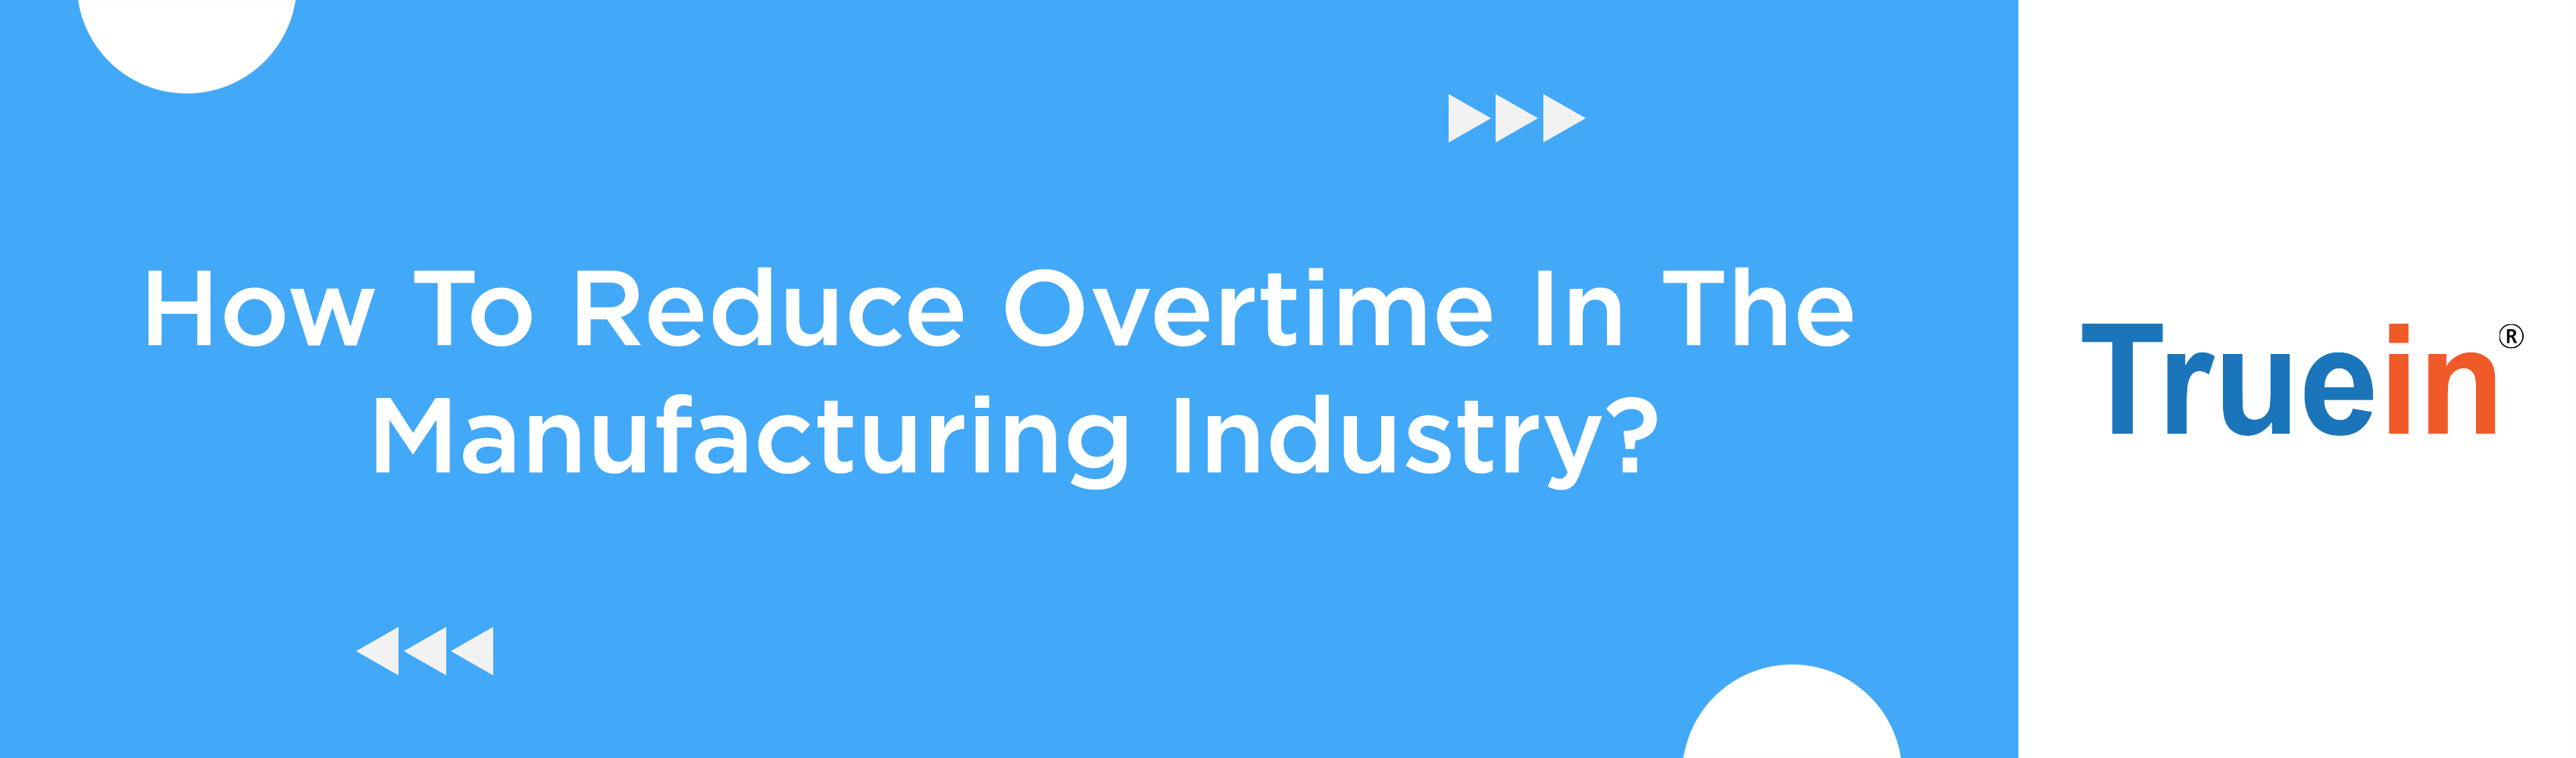 Why and How To Reduce Overtime In The Manufacturing Industry?